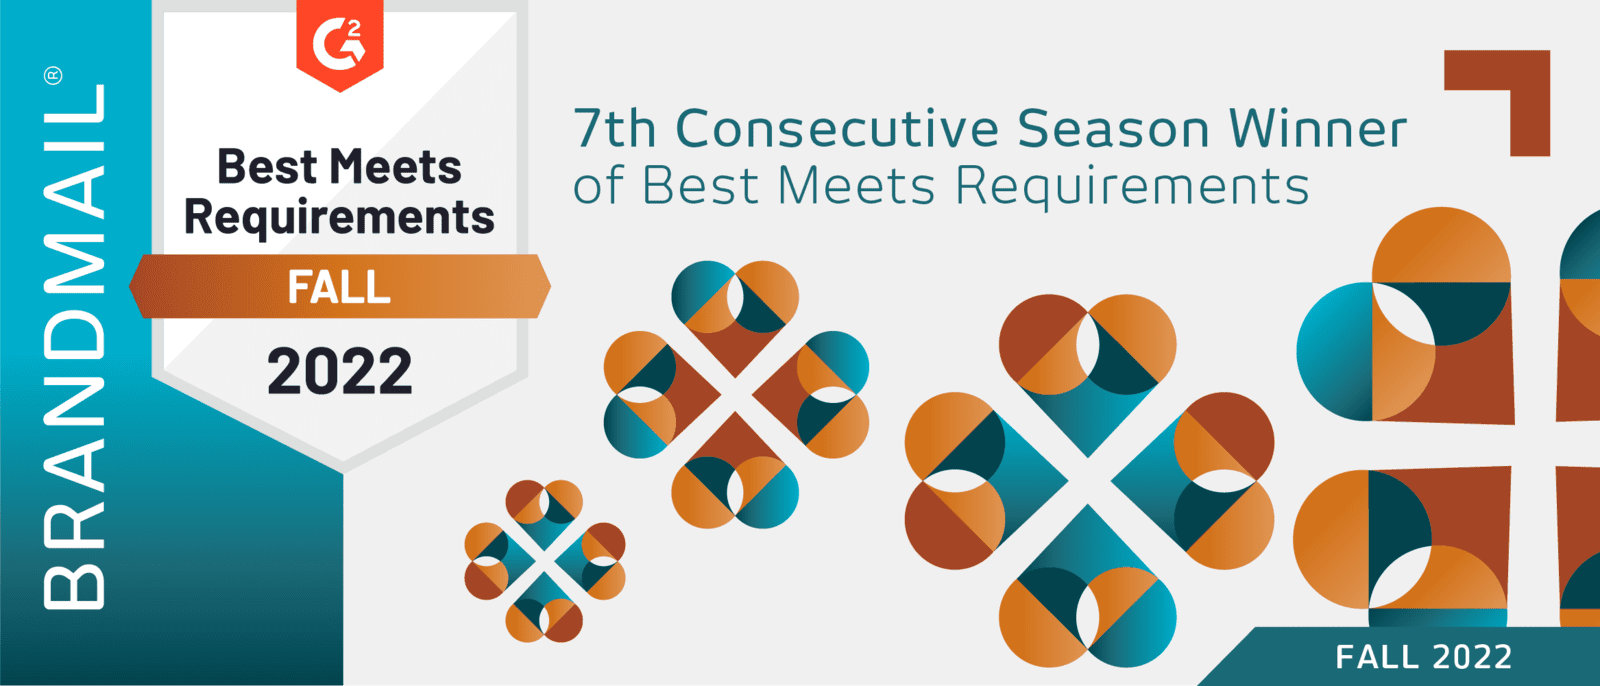 G2 ranks BrandMail as best meeting requirements for the seventh consecutive season